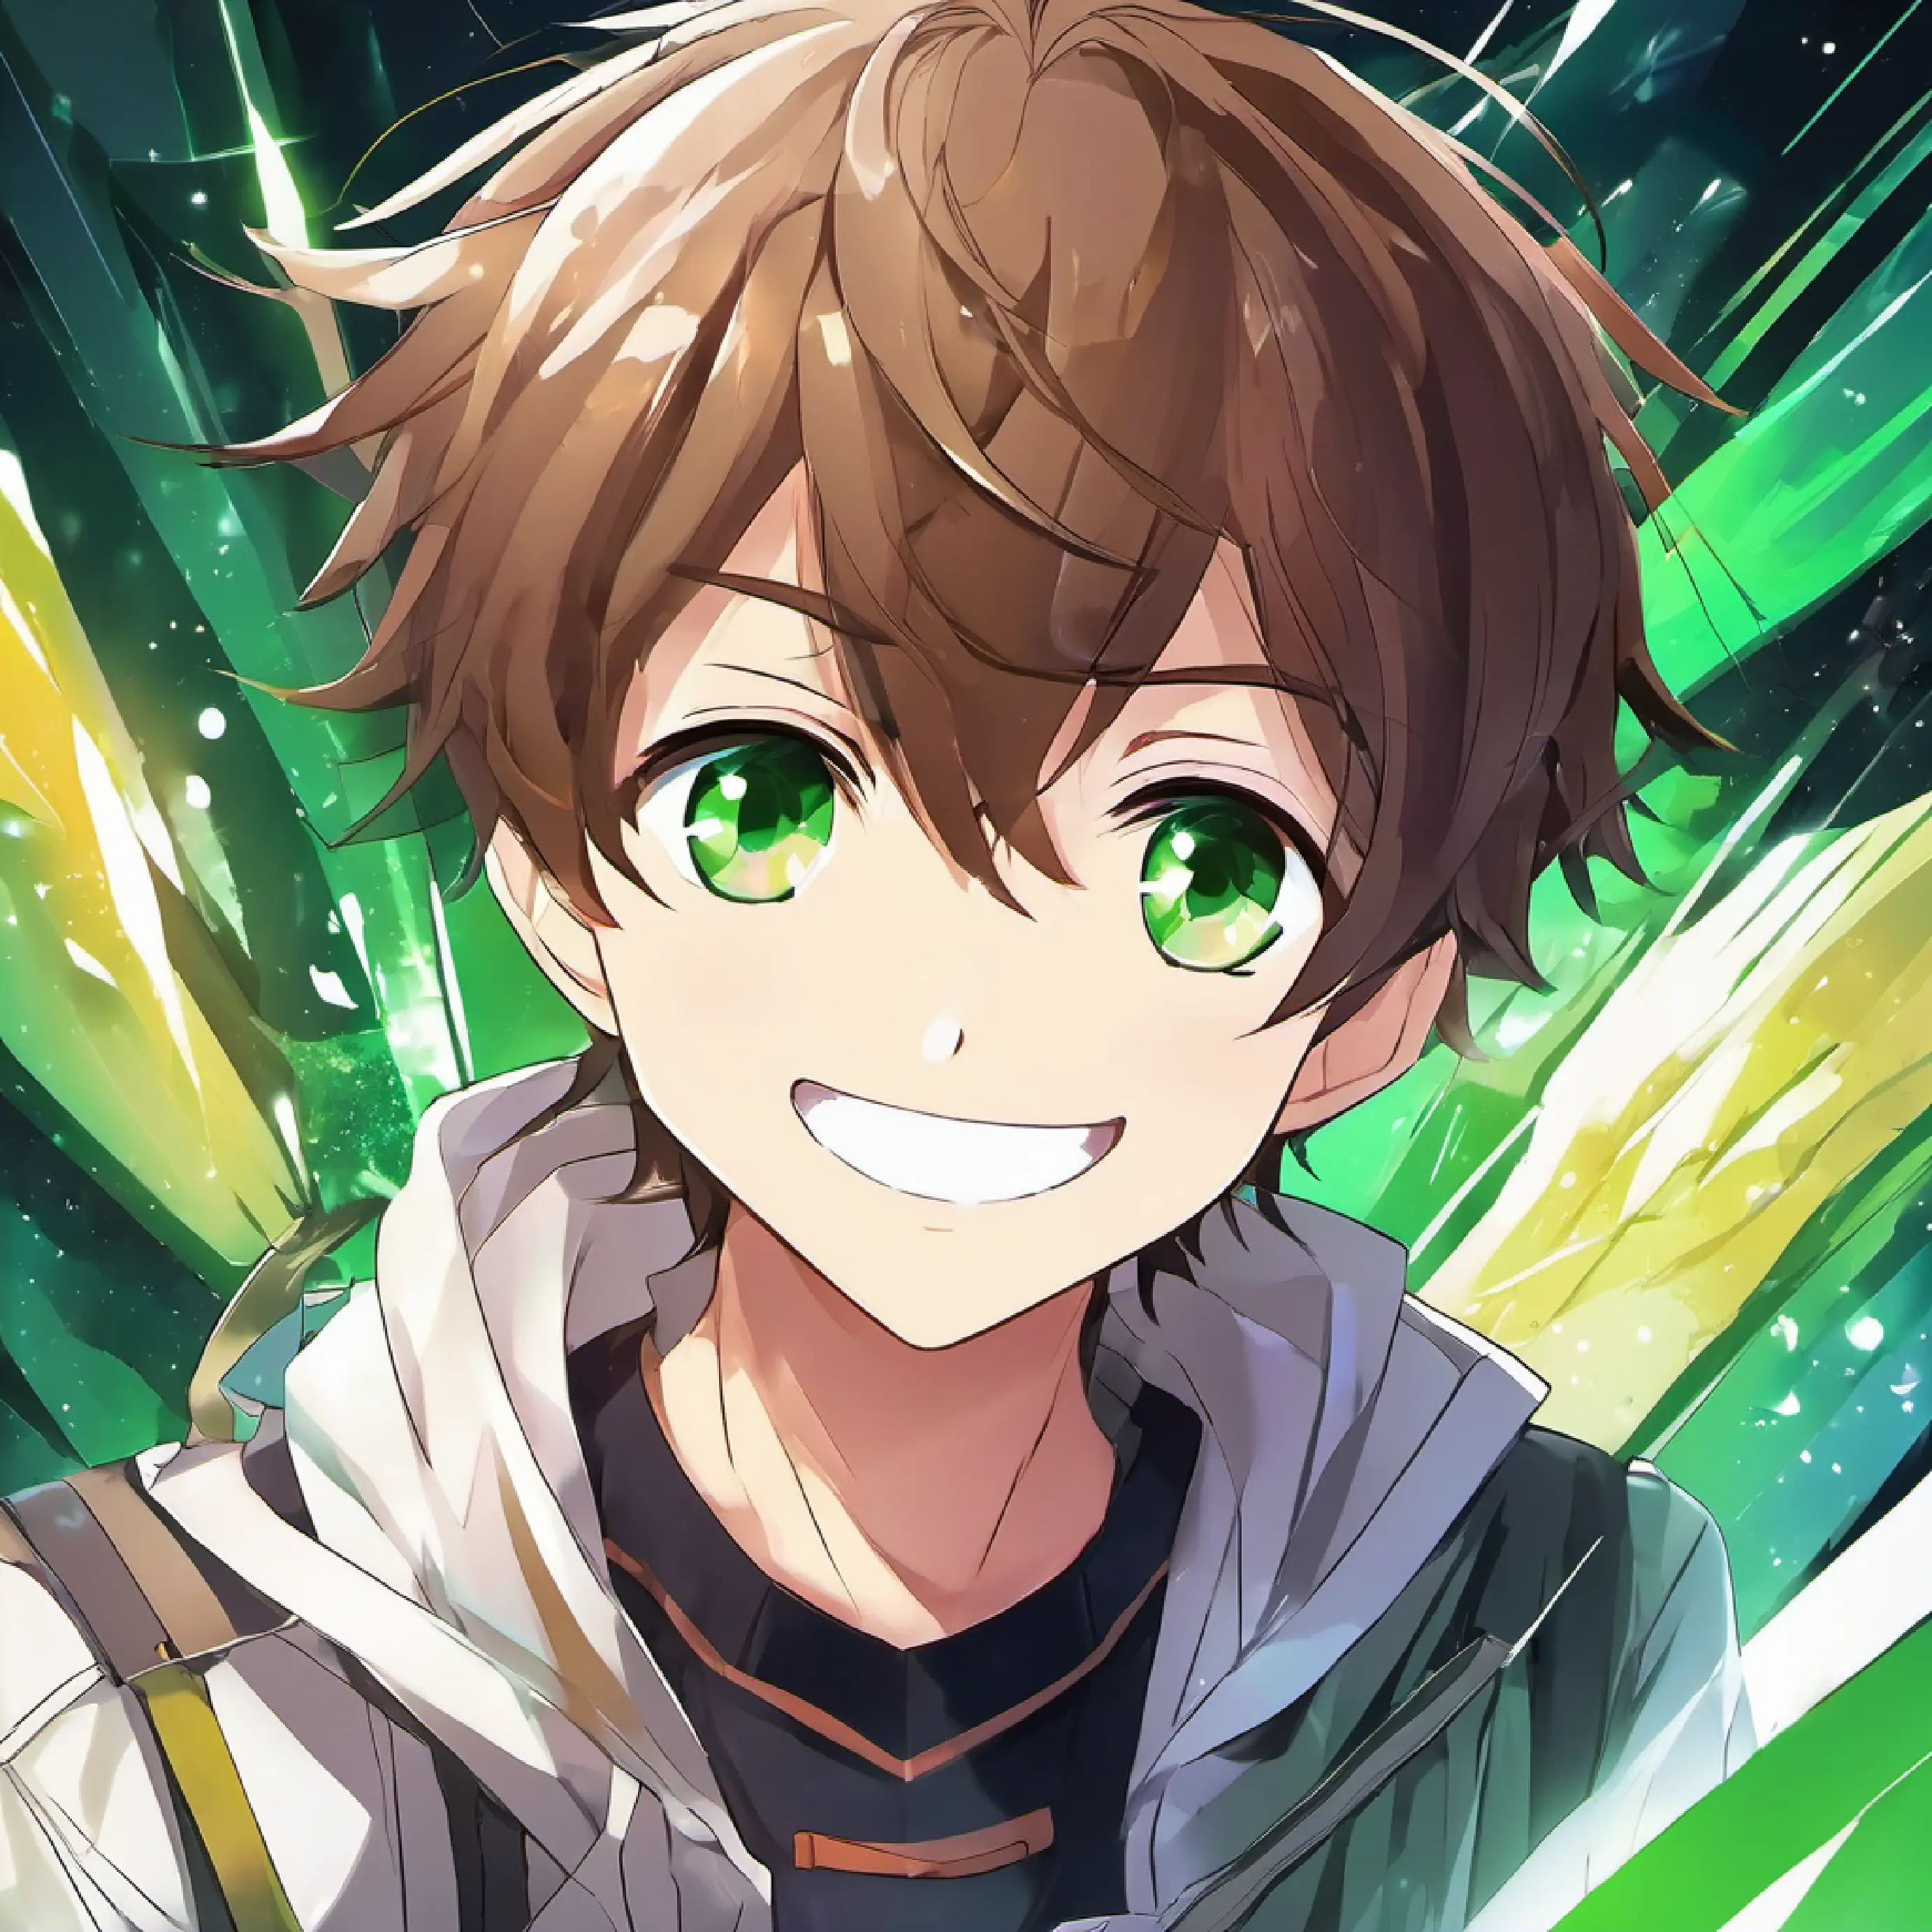 Energetic boy, brown hair, green eyes, always smiling's home, sharing stories, excited for tomorrow